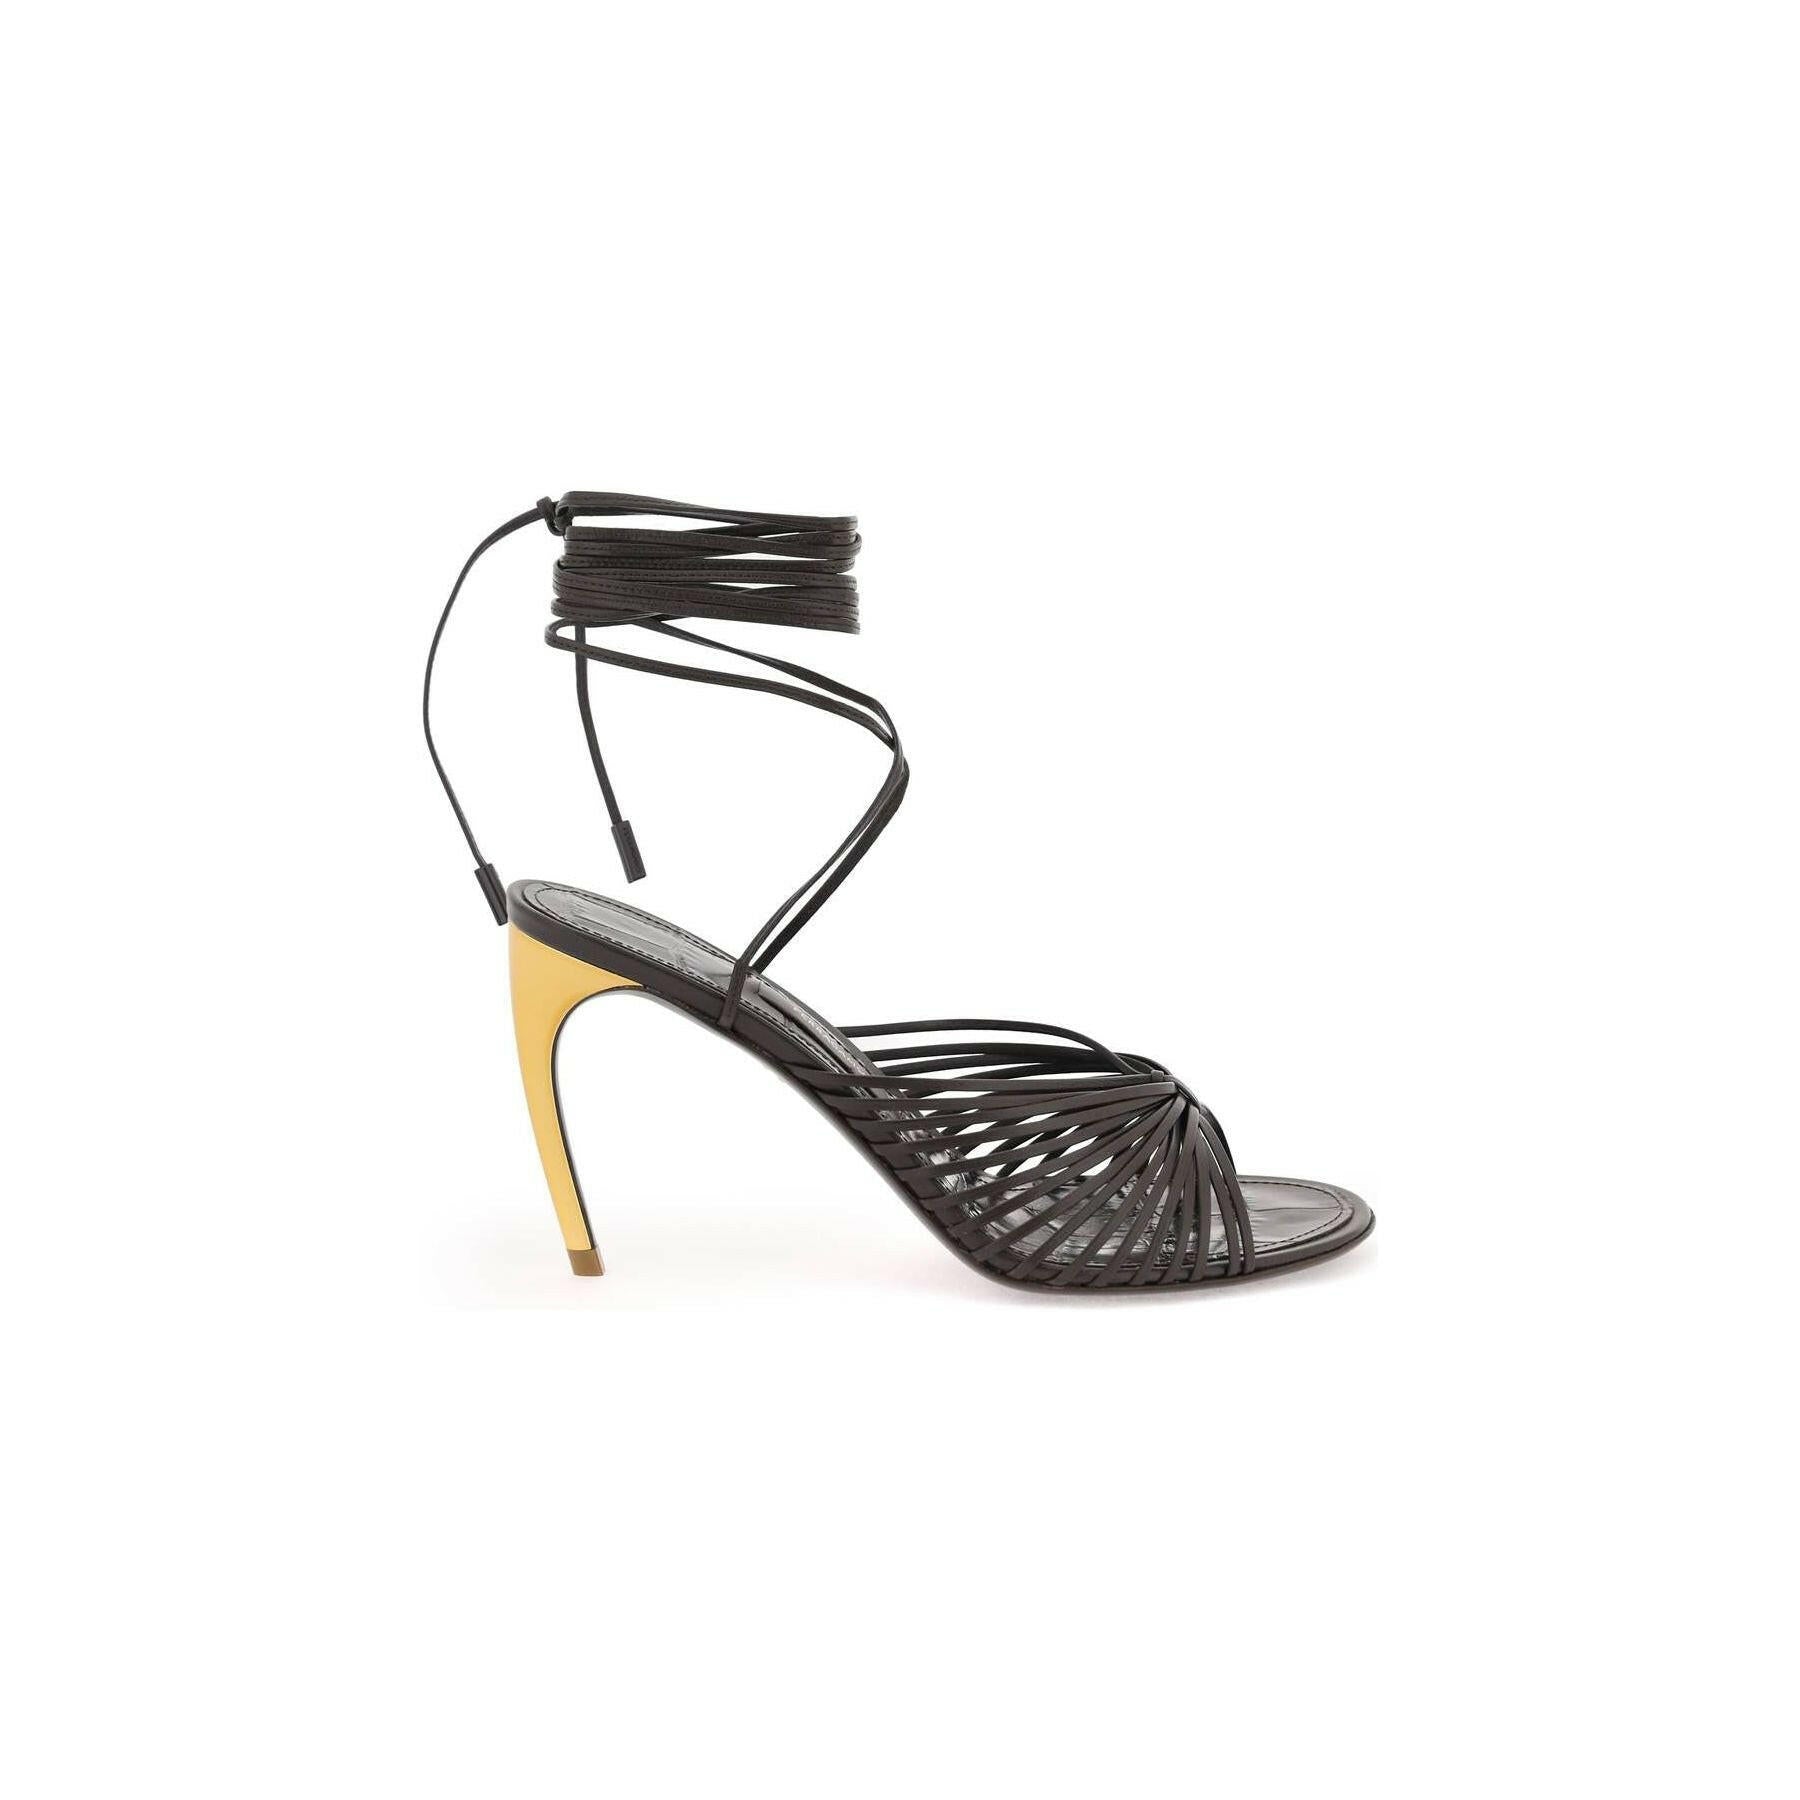 Atena Curved Heel Leather Sandals